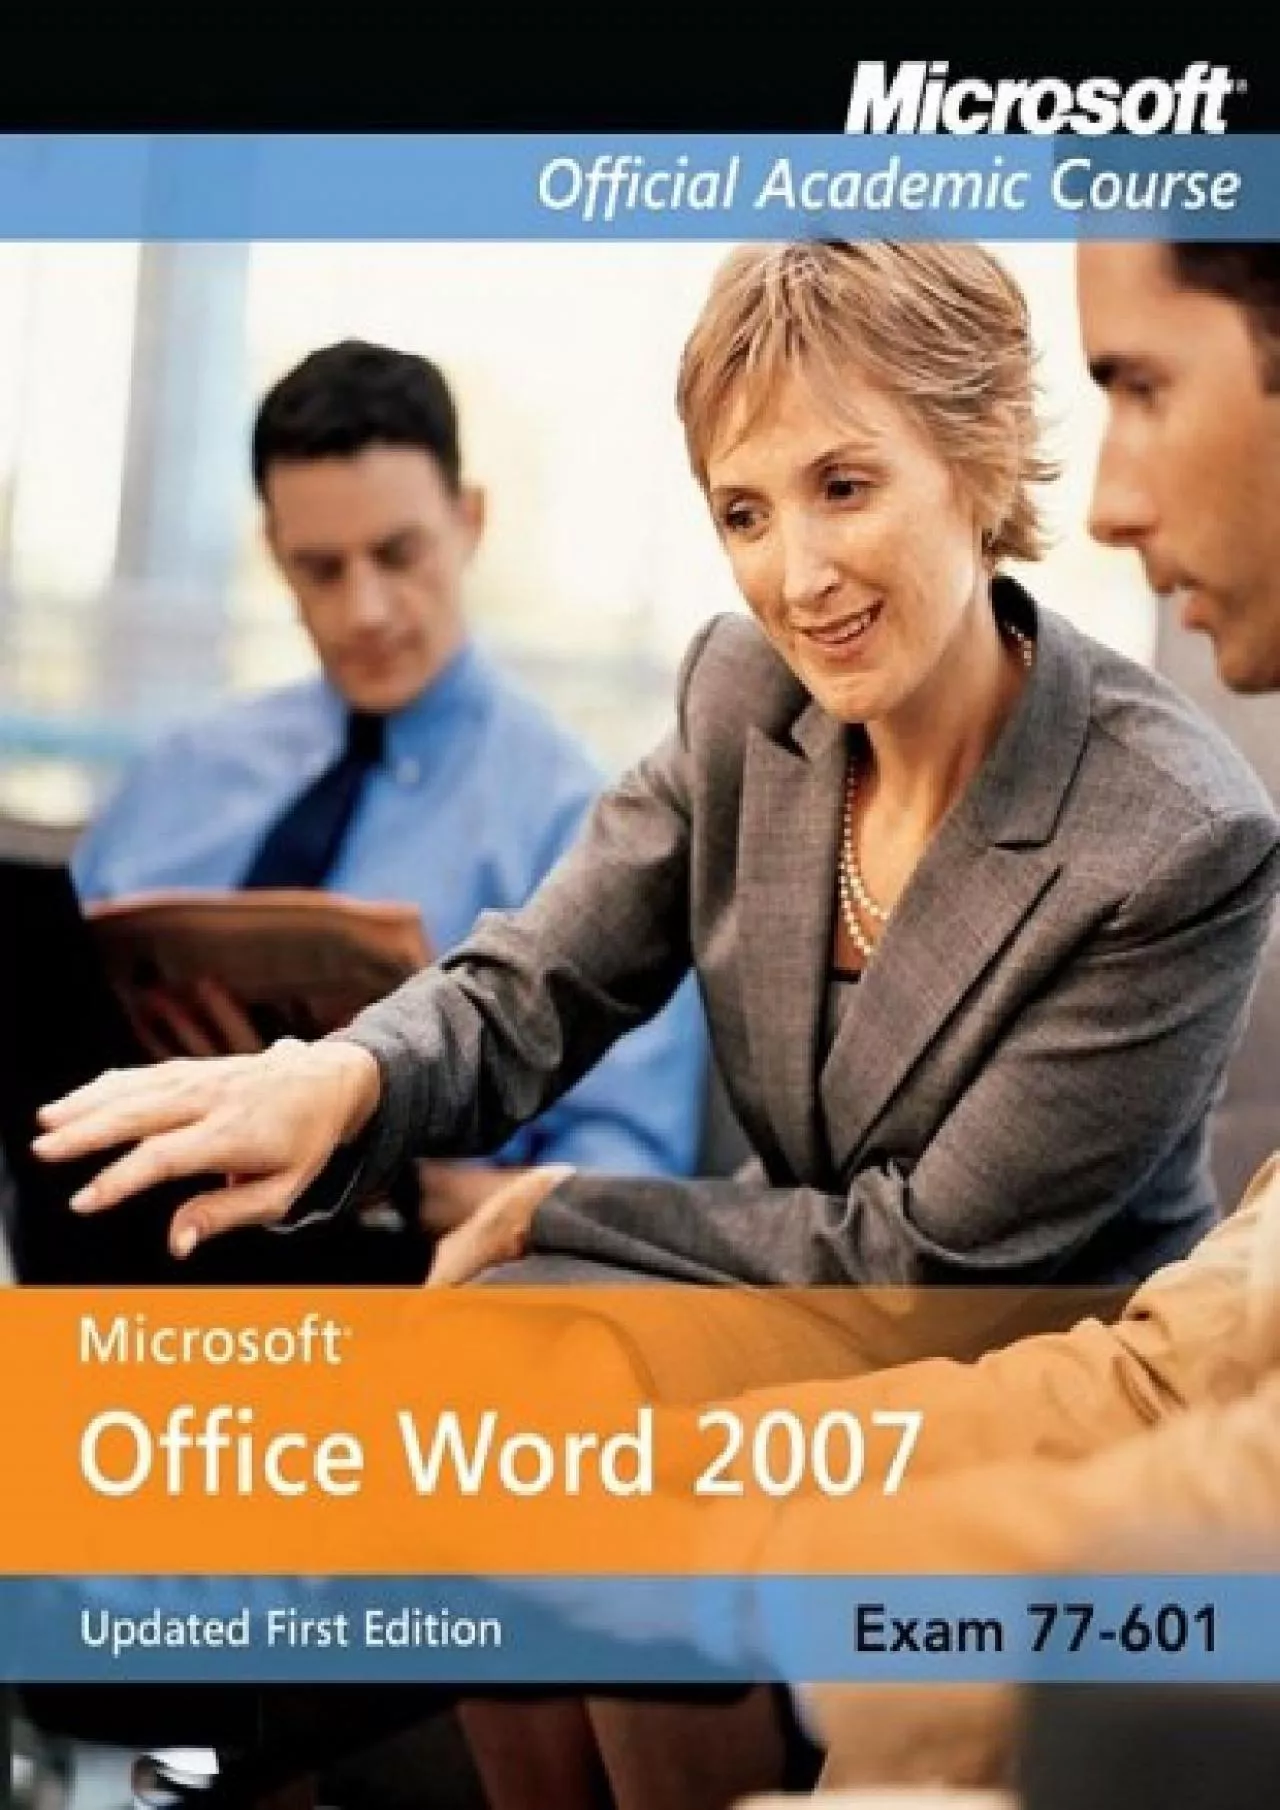 (DOWNLOAD)-Exam 77-601: Microsoft Office Word 2007 (Microsoft Official Academic Course